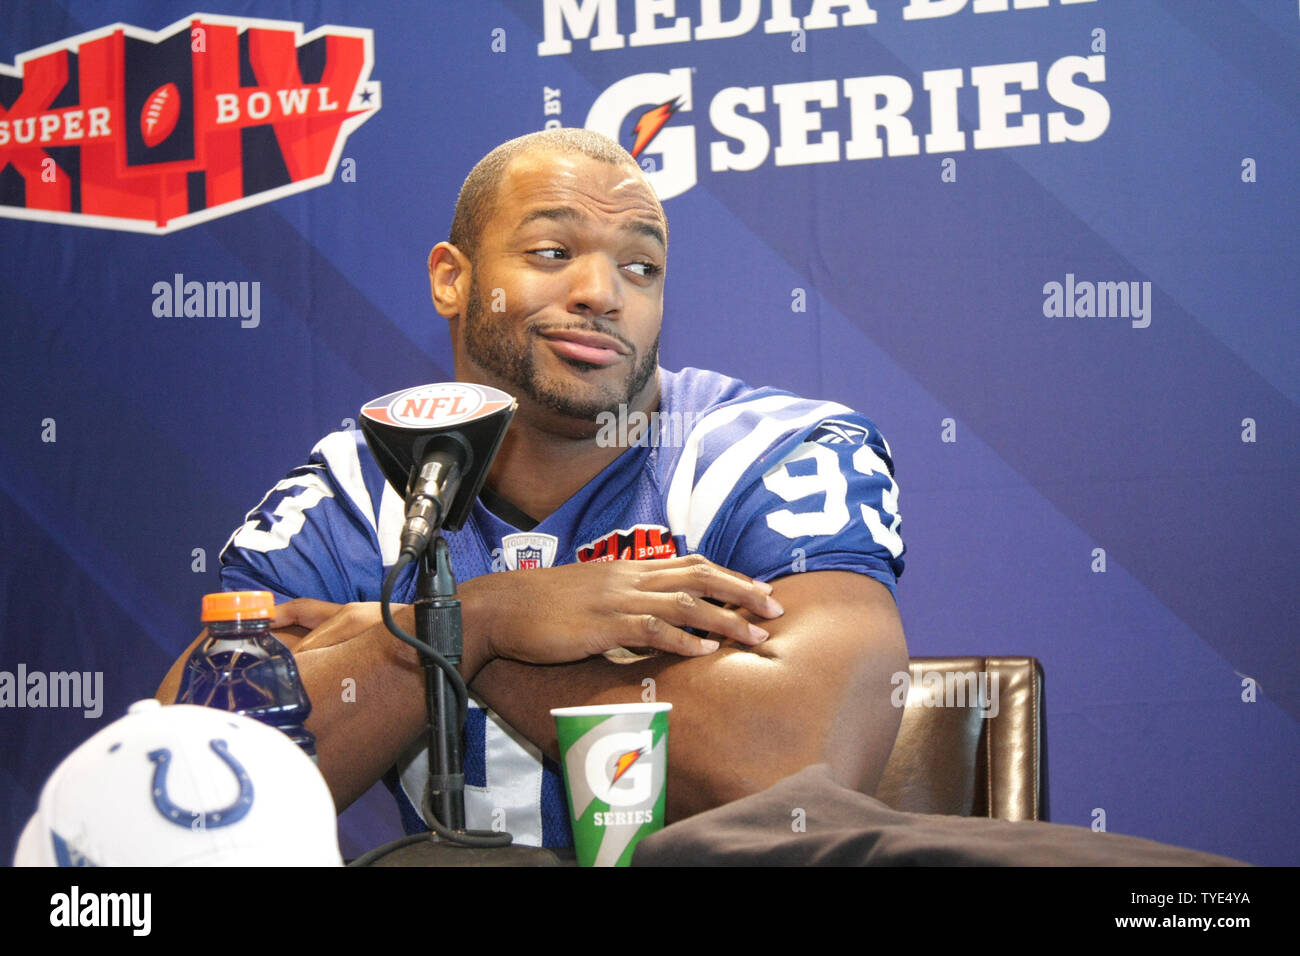 Indianapolis Colts defensive end Dwight Freeney attends Media Day at Sun Life Stadium, in Miami on February 2, 2010. Freeney sprained his ankle last week in the AFC Championship game and may not play in Super Bowl XLIV. Super Bowl XLIV will feature the Indianapolis Colts and New Orleans Saints on Sunday, February 7. UPI/Susan Knowles Stock Photo